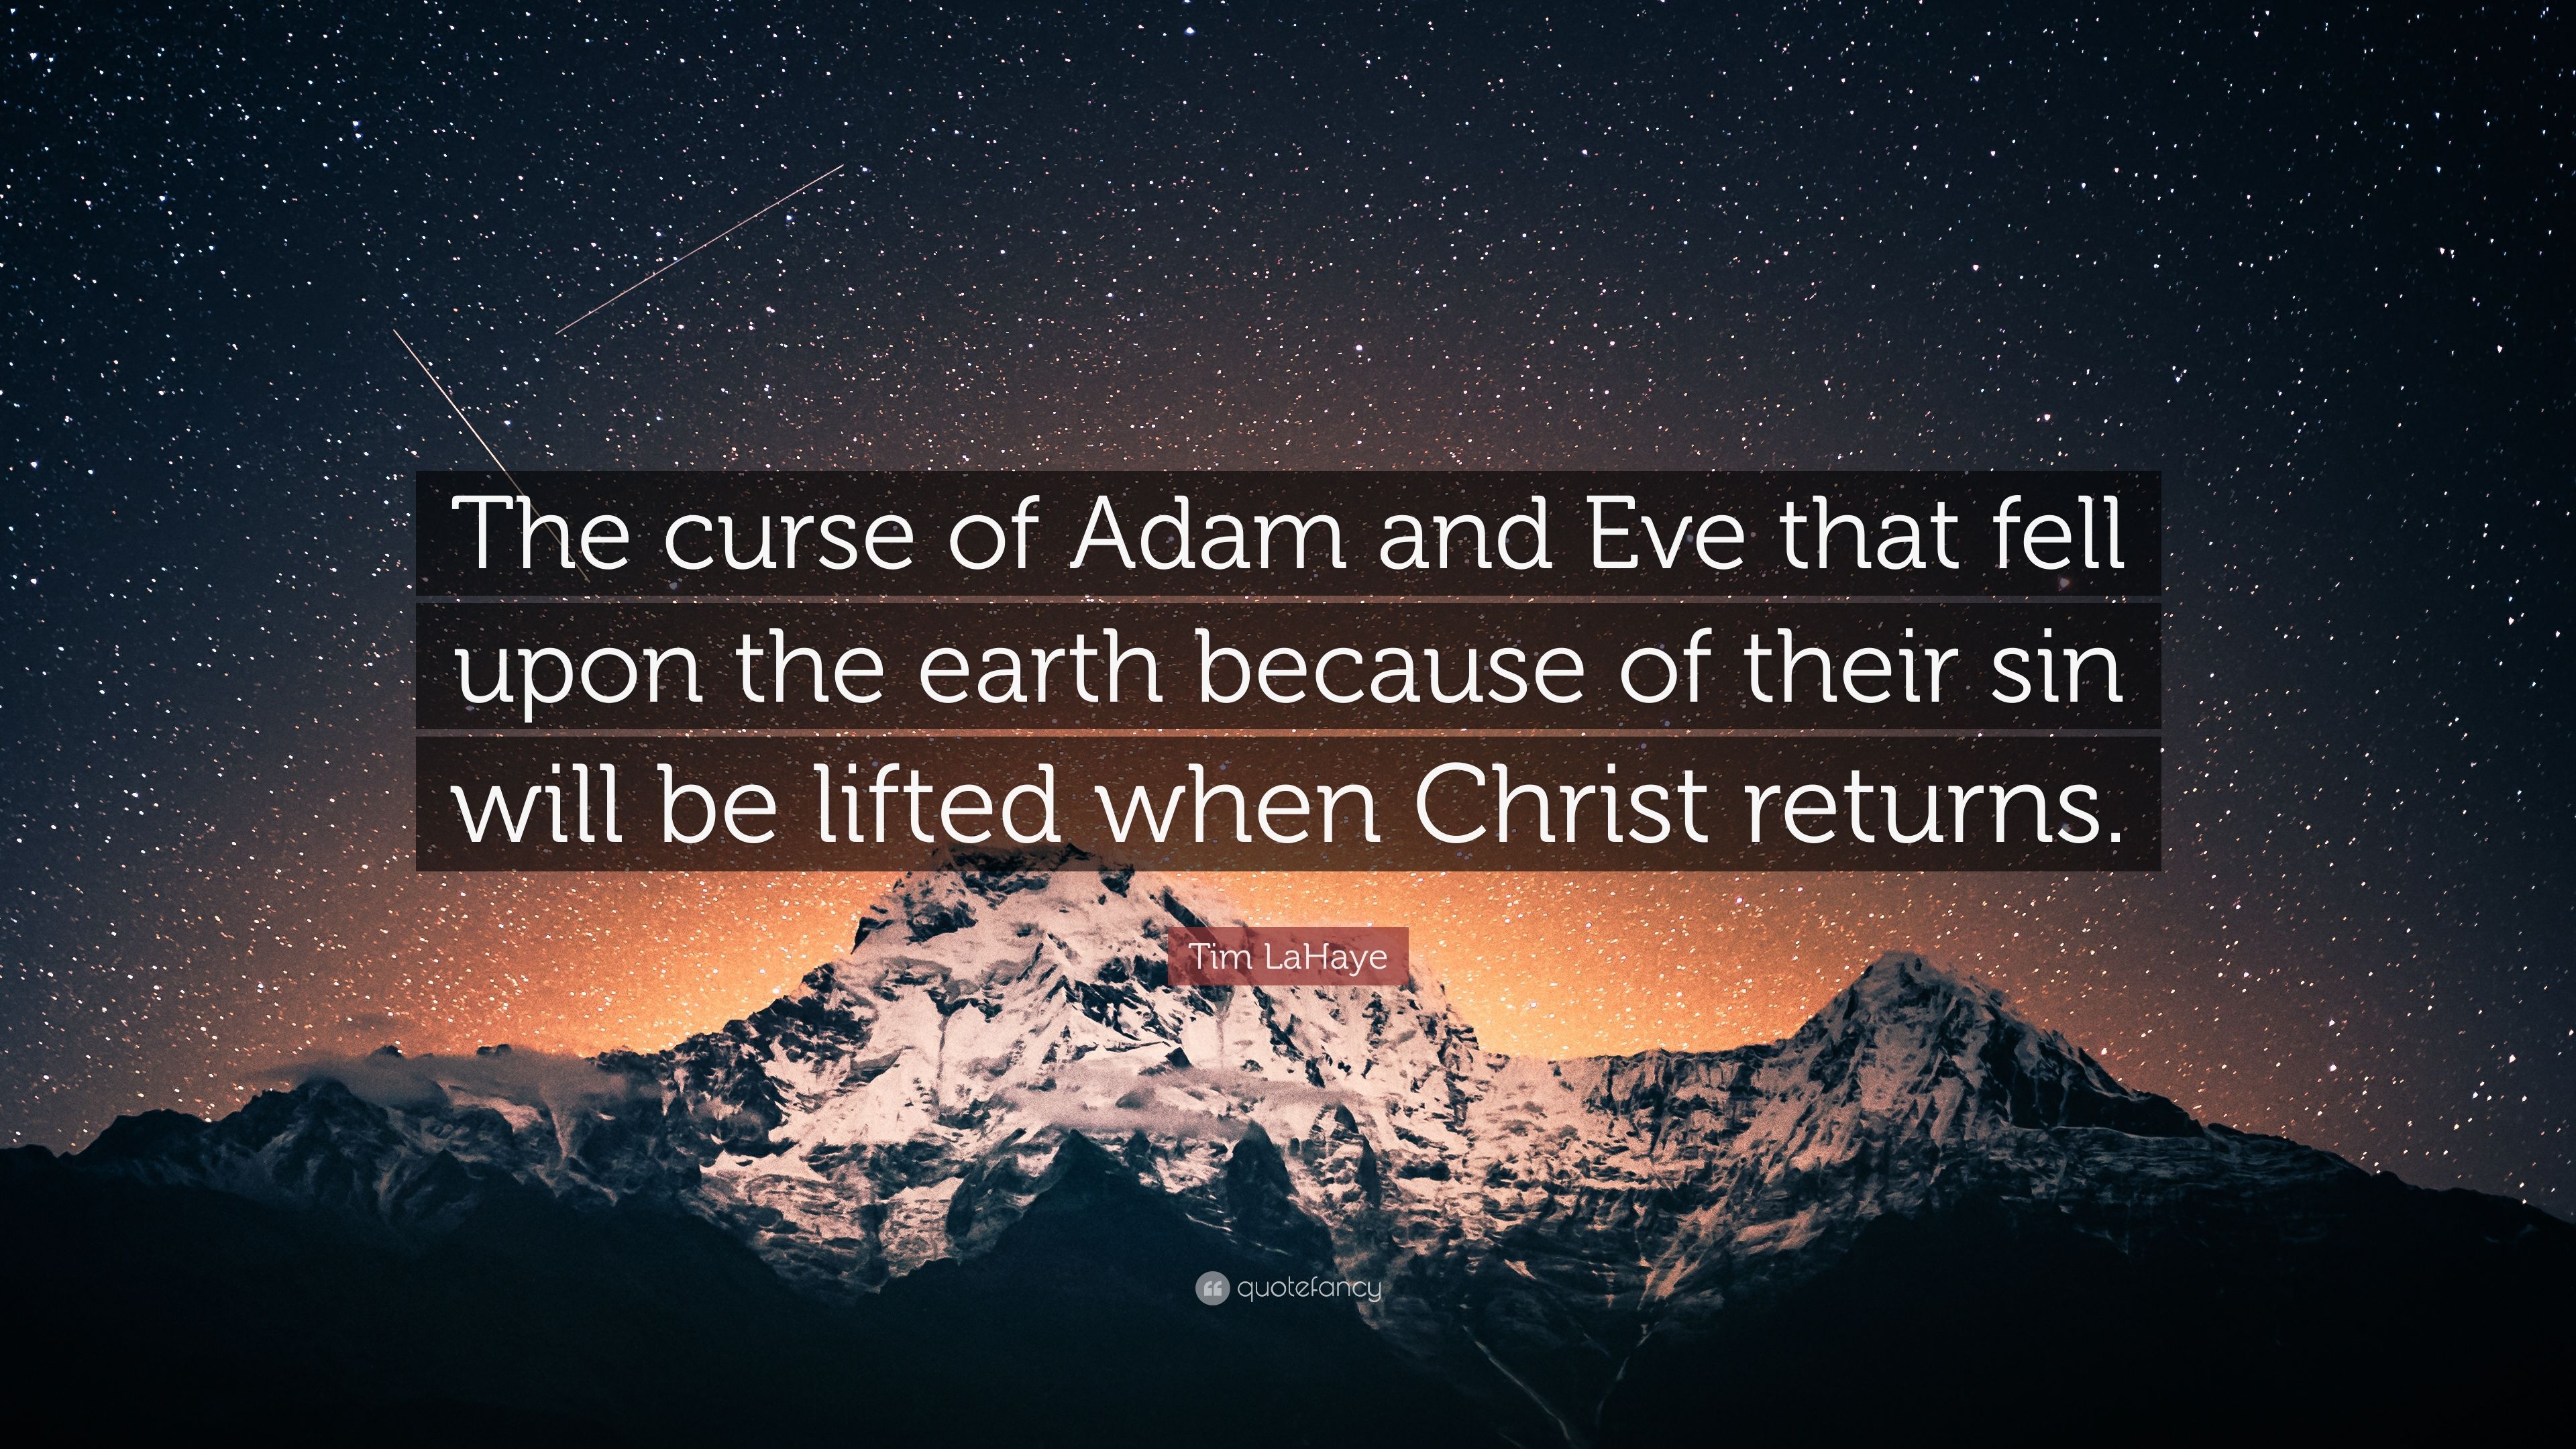 Tim LaHaye Quote: “The curse of Adam and Eve that fell upon